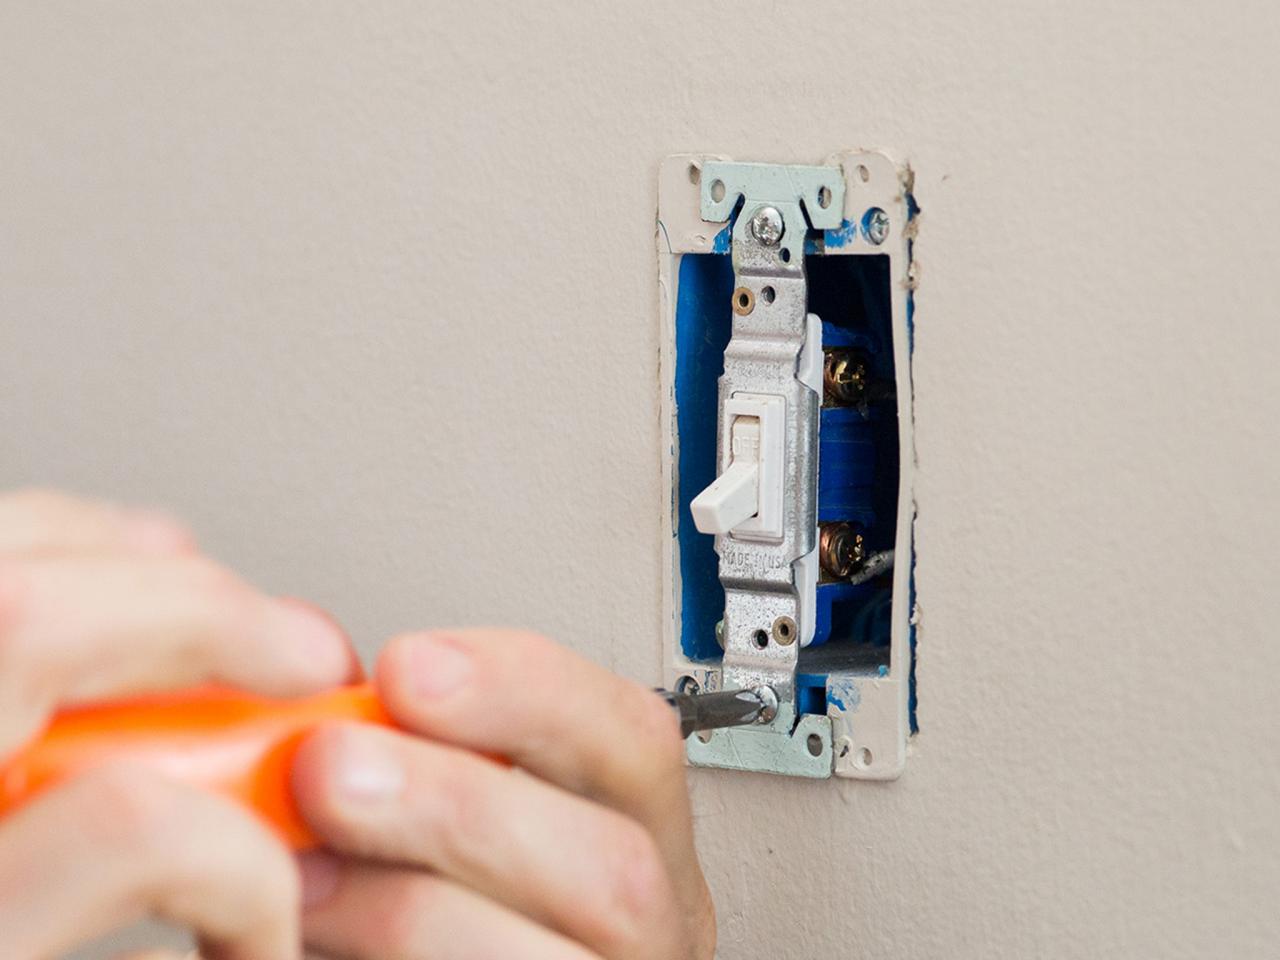 How To Wire A Light Switch, How To Make A Lamp Dimmer Switch Replace